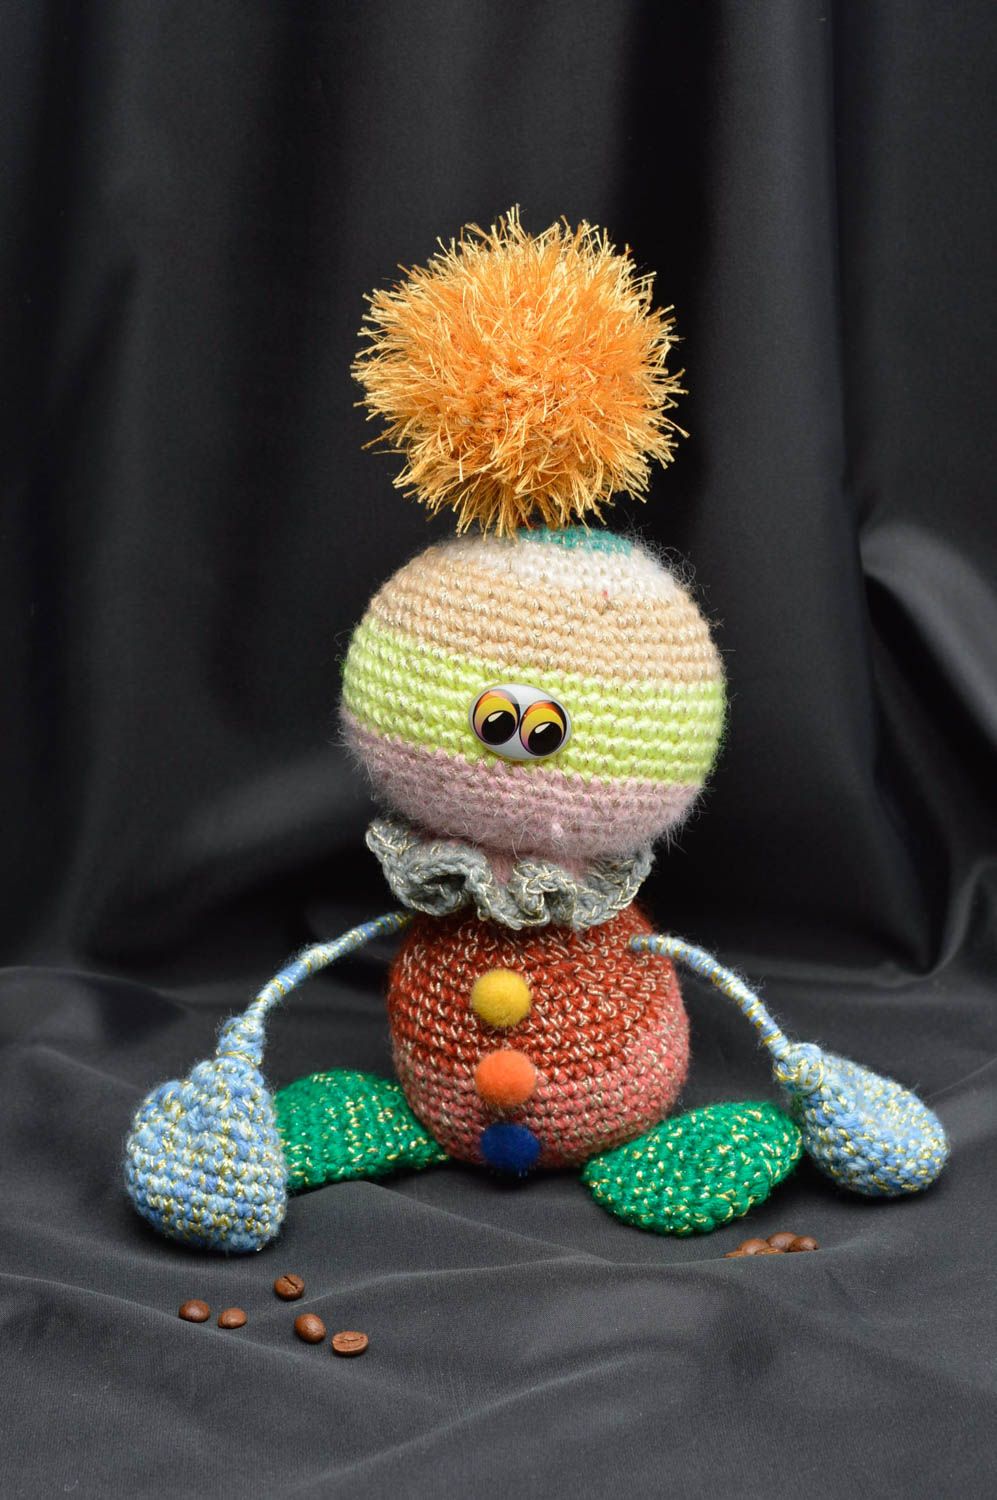 Unusual handmade soft toy stylish crocheted souvenirs unusual present for kids photo 1